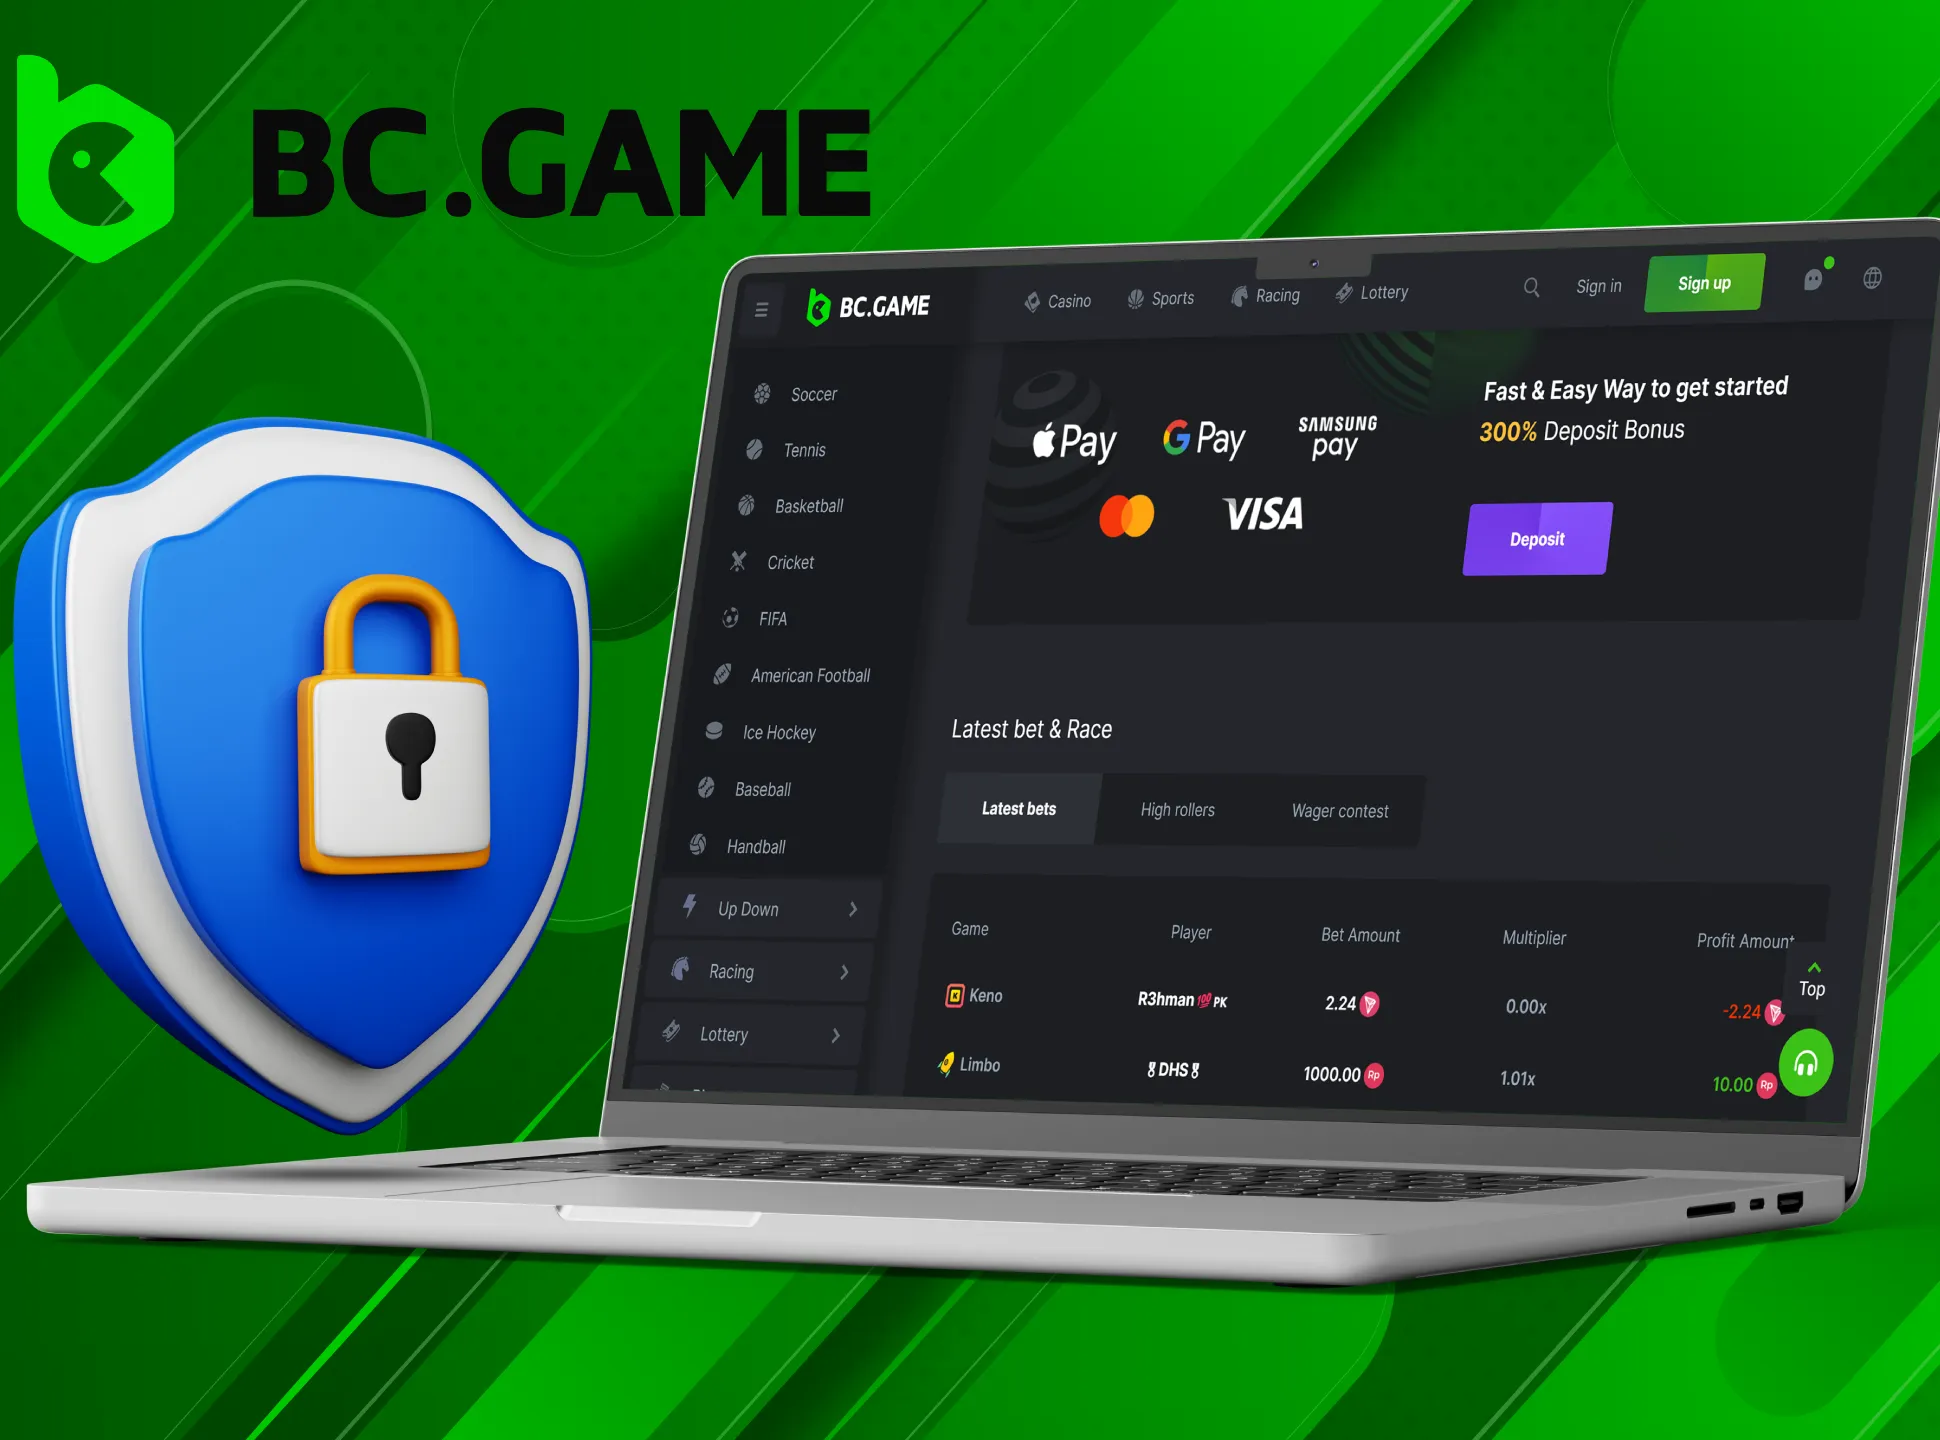 BC Game is a trusted casino with a high level of data protection for its users.